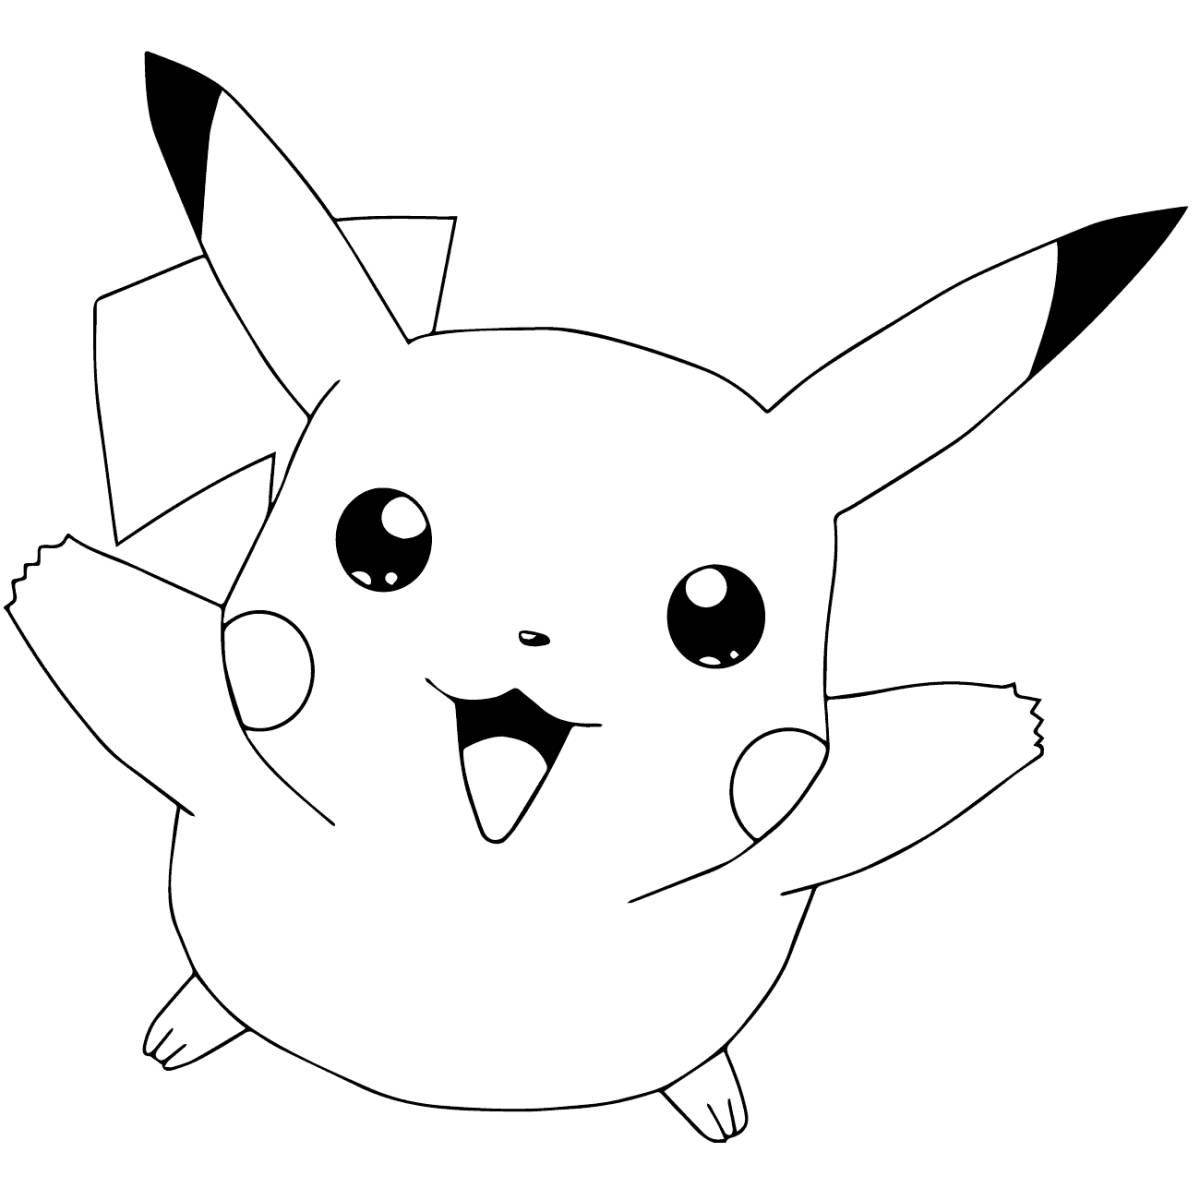 Sweet pikachu coloring page